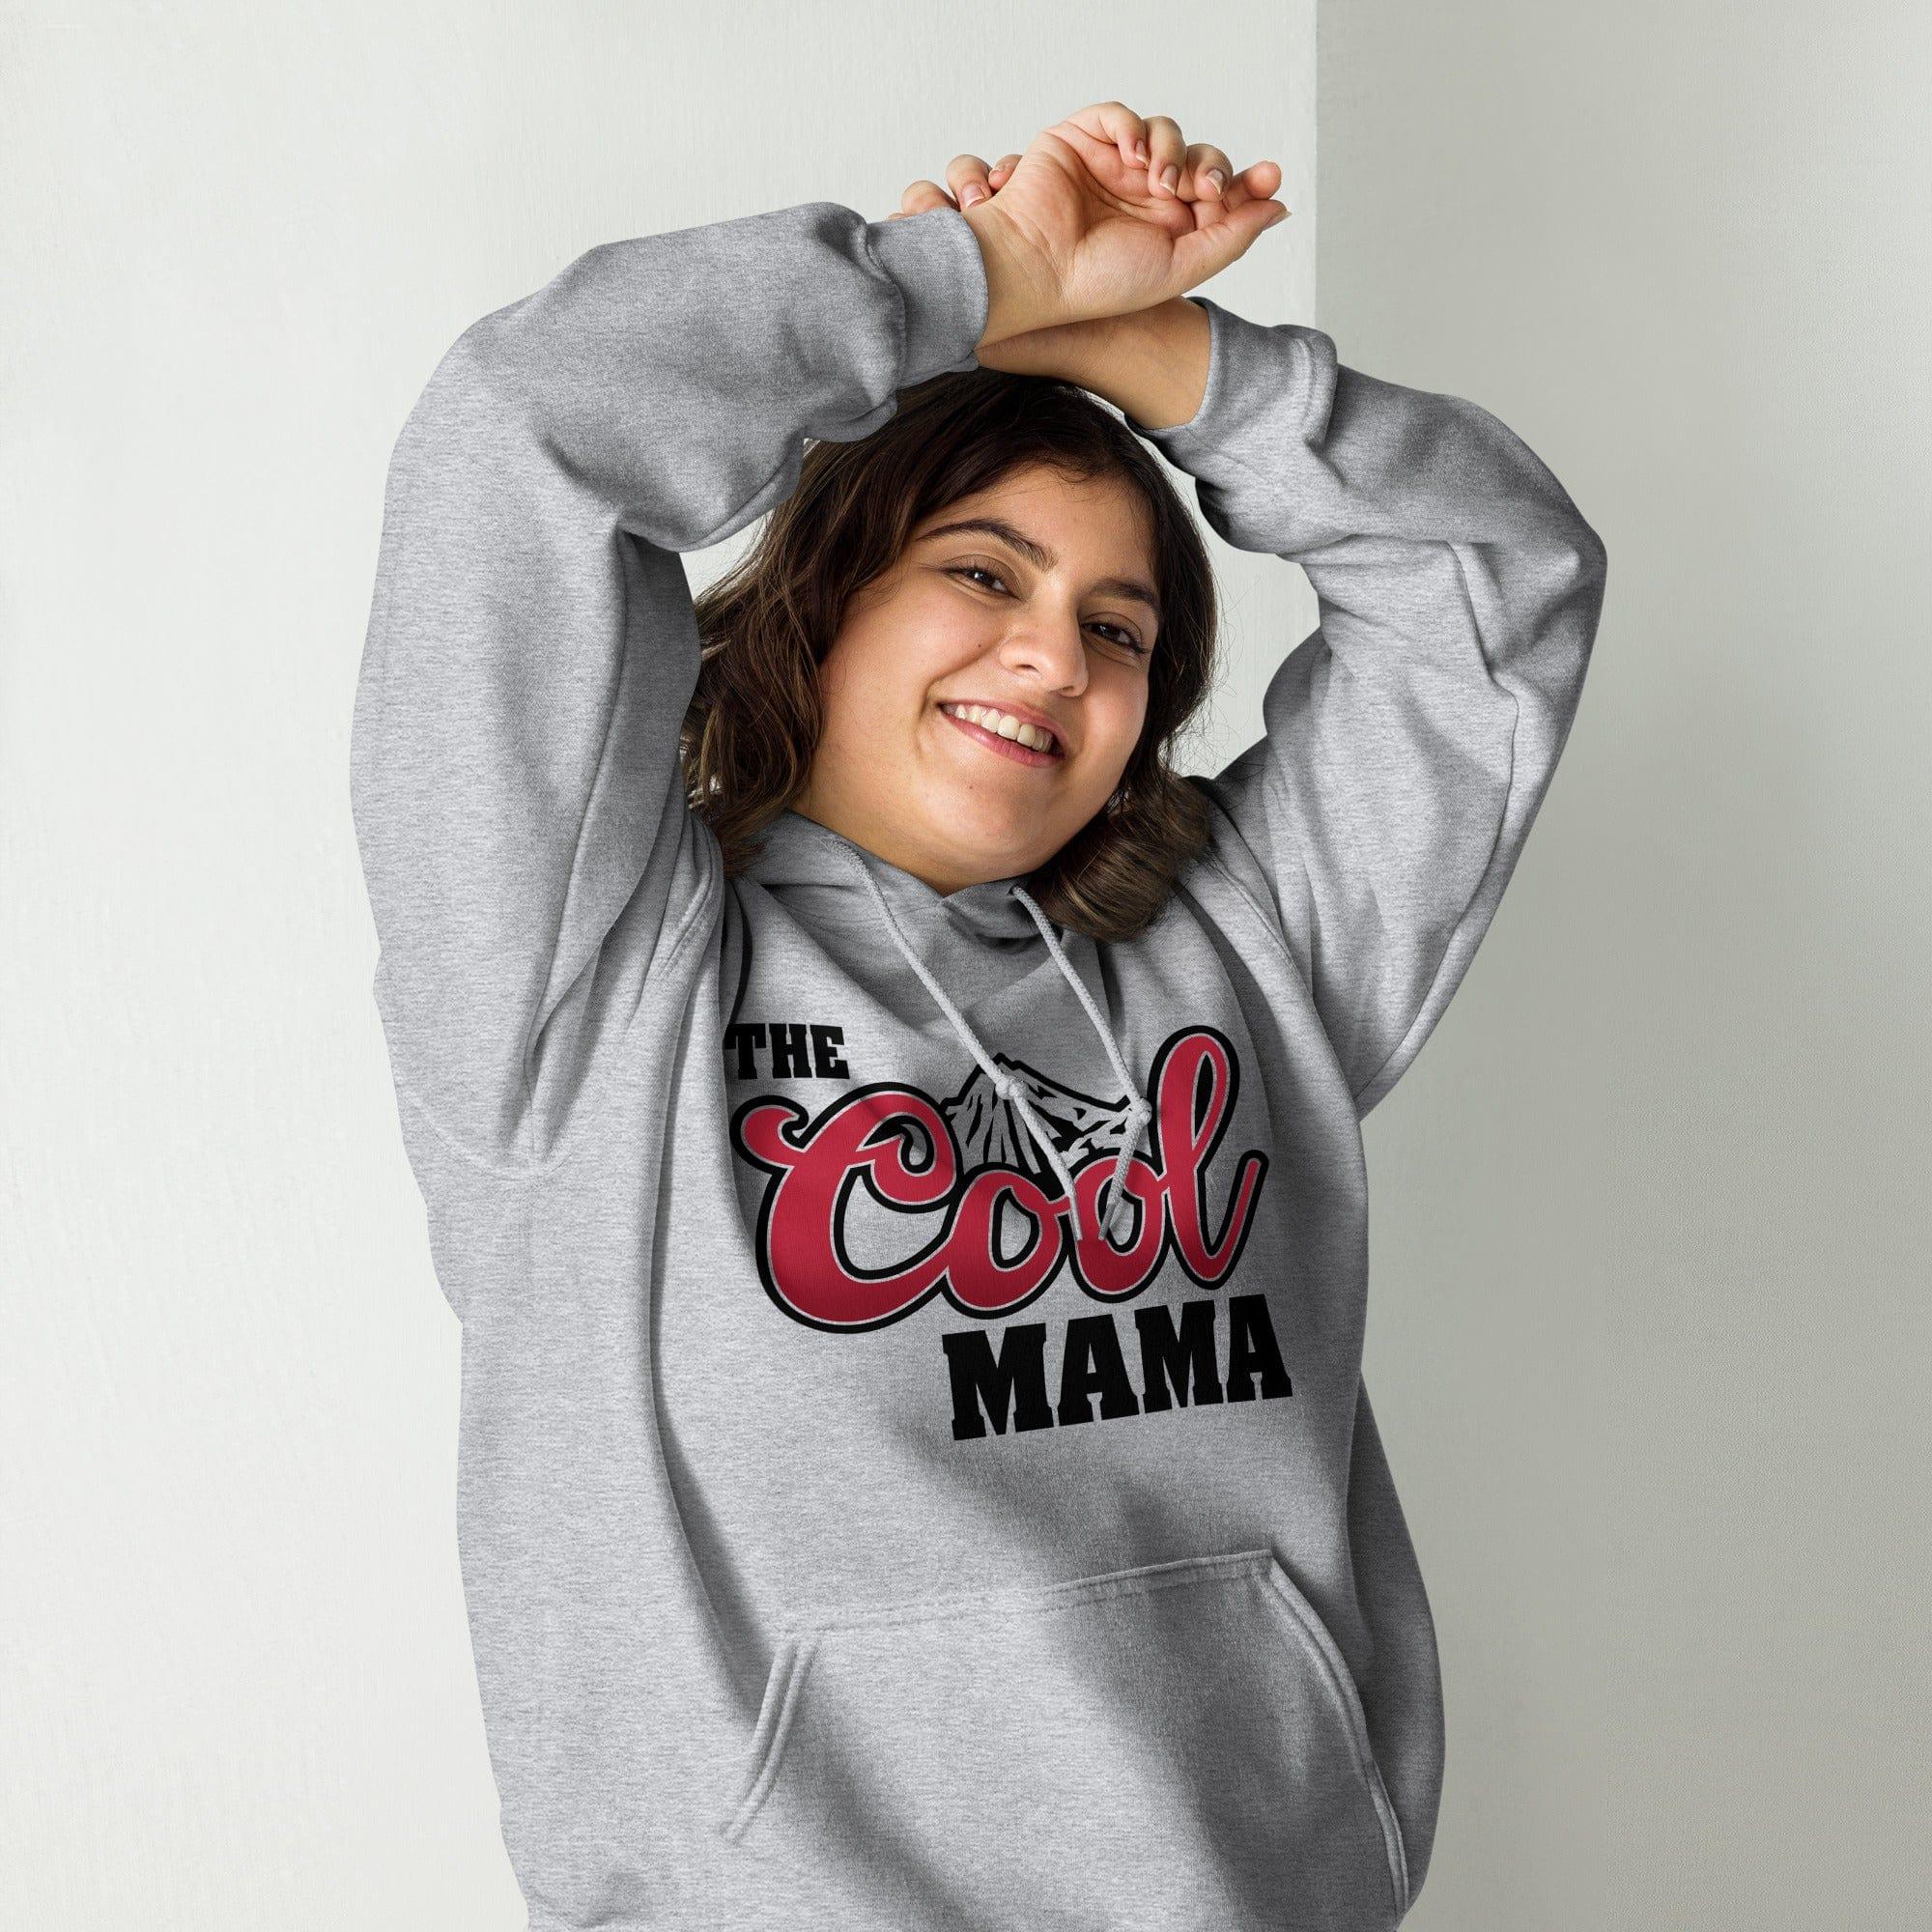 Mother's Day Hoodie The Cool Mama Blended Cotton Pullover - TopKoalaTee